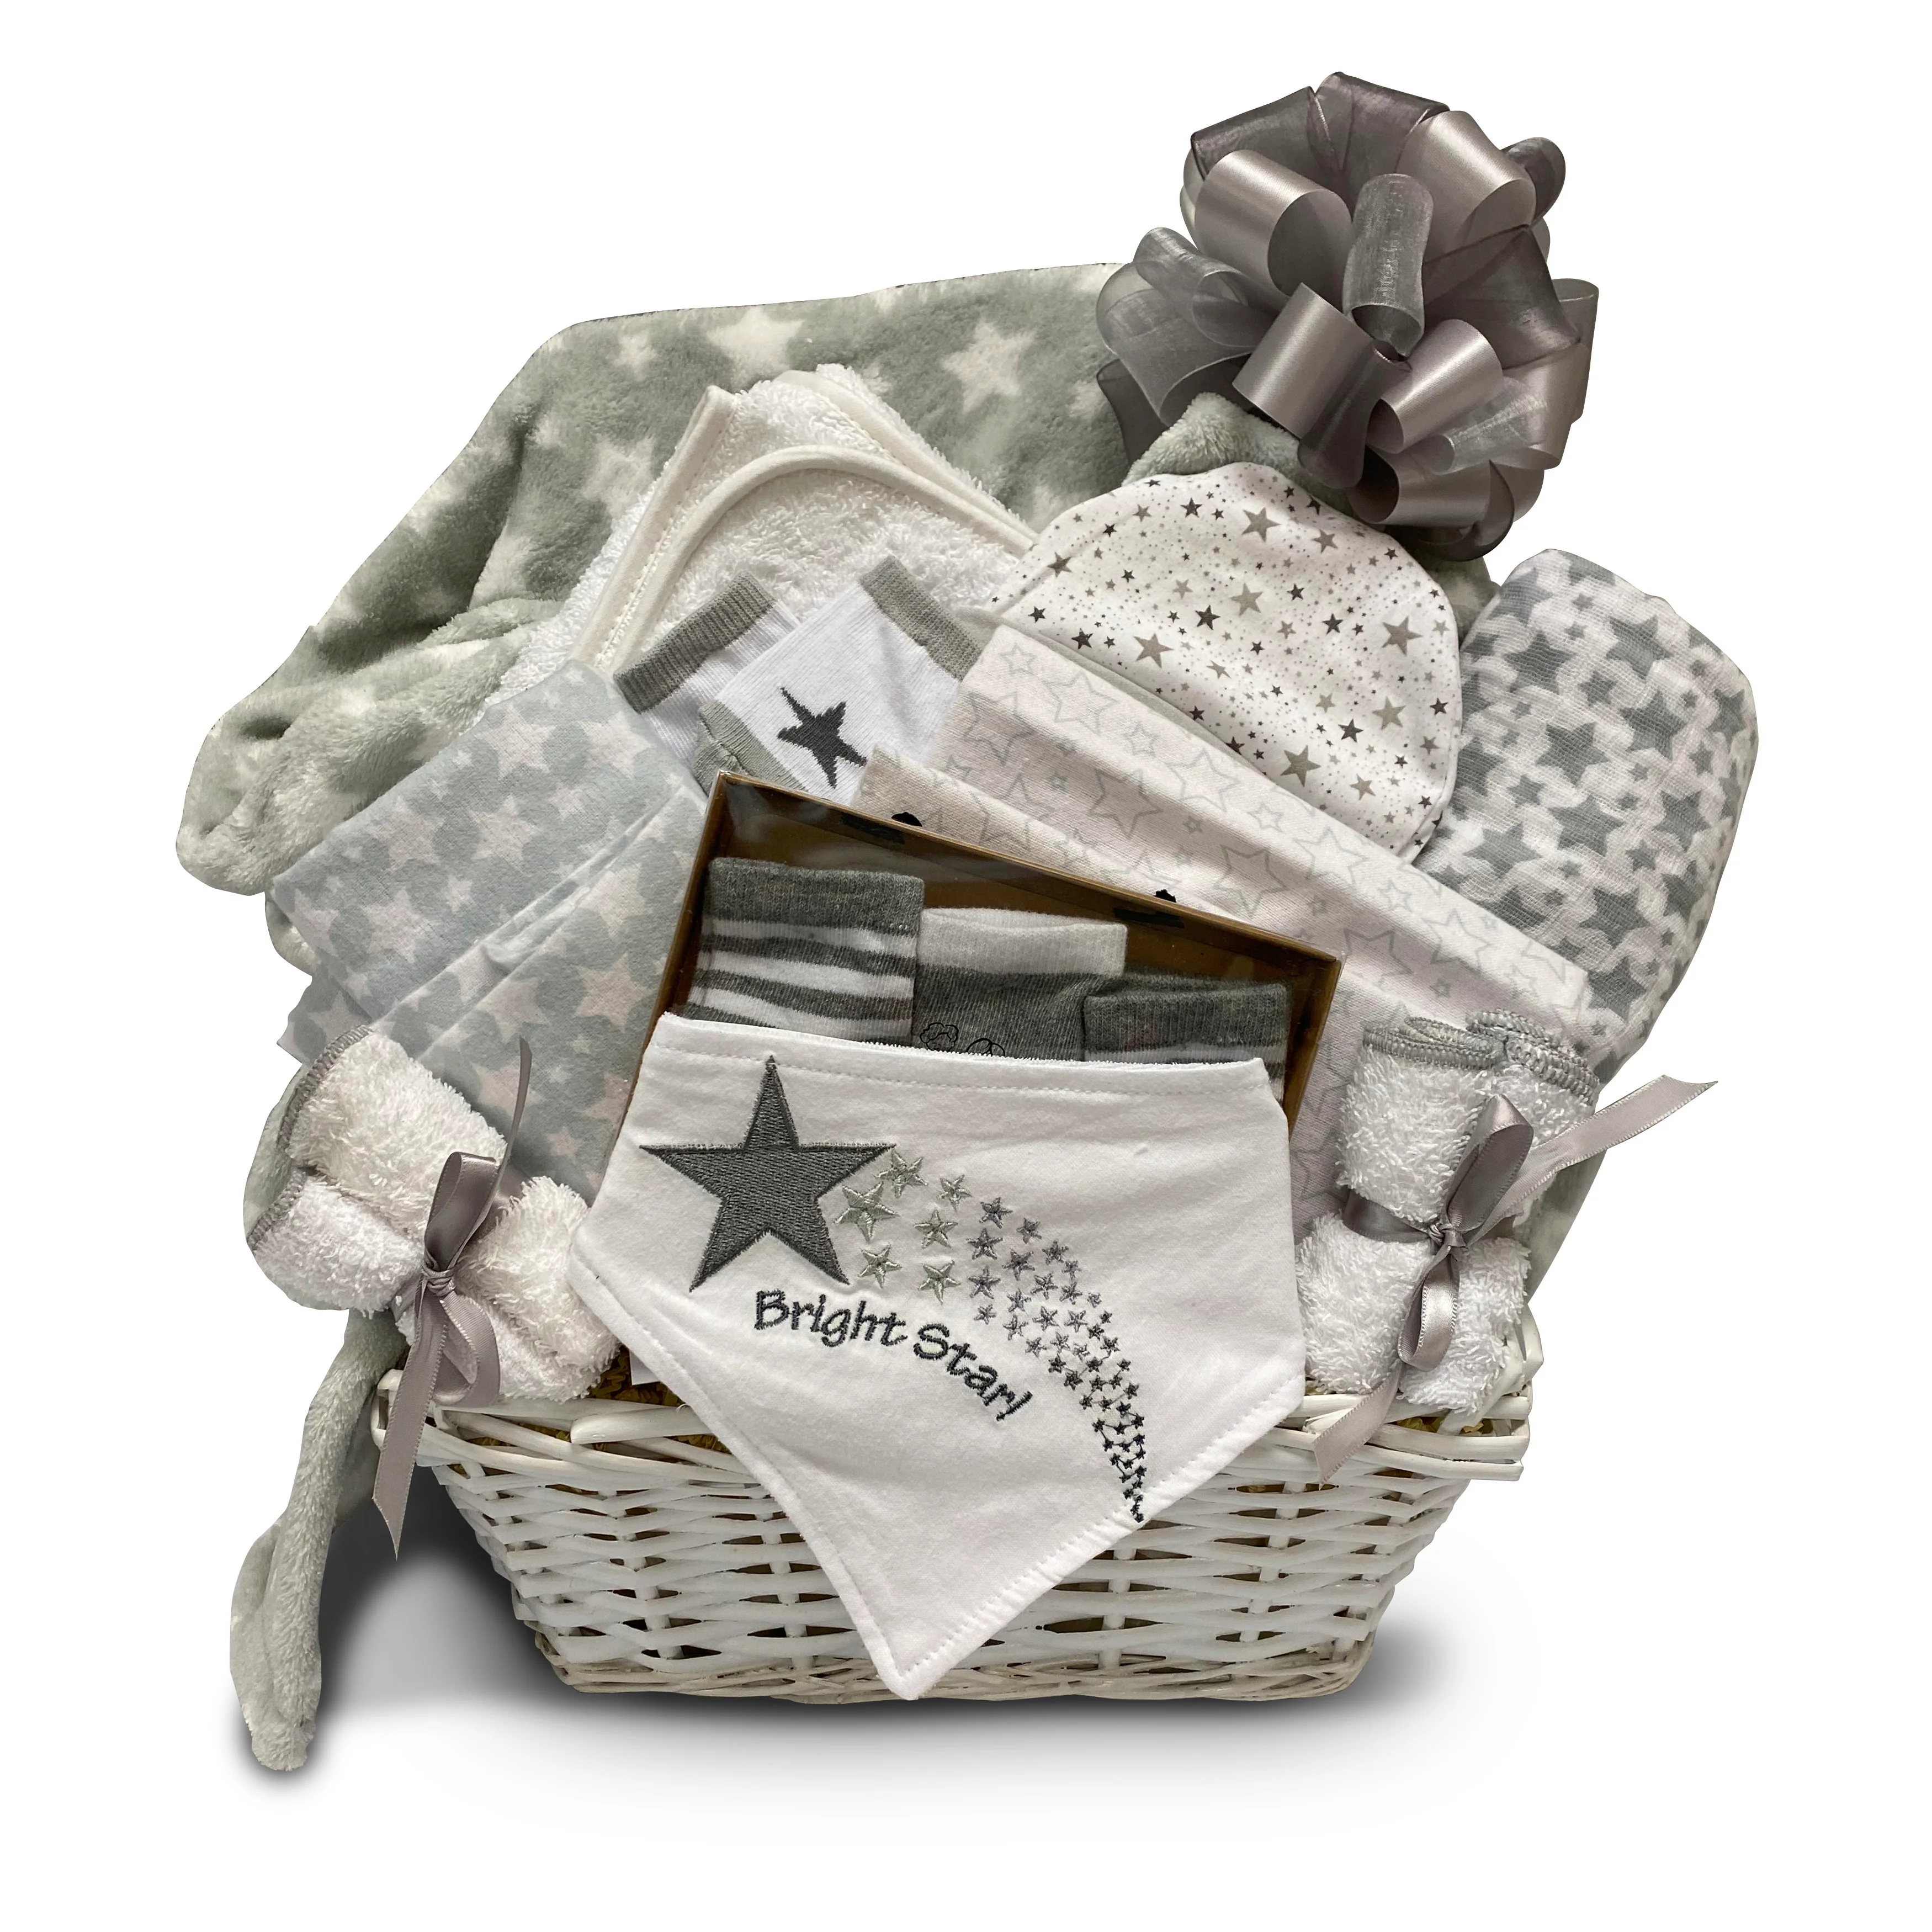 It's a Little Baby! Gift Basket product image